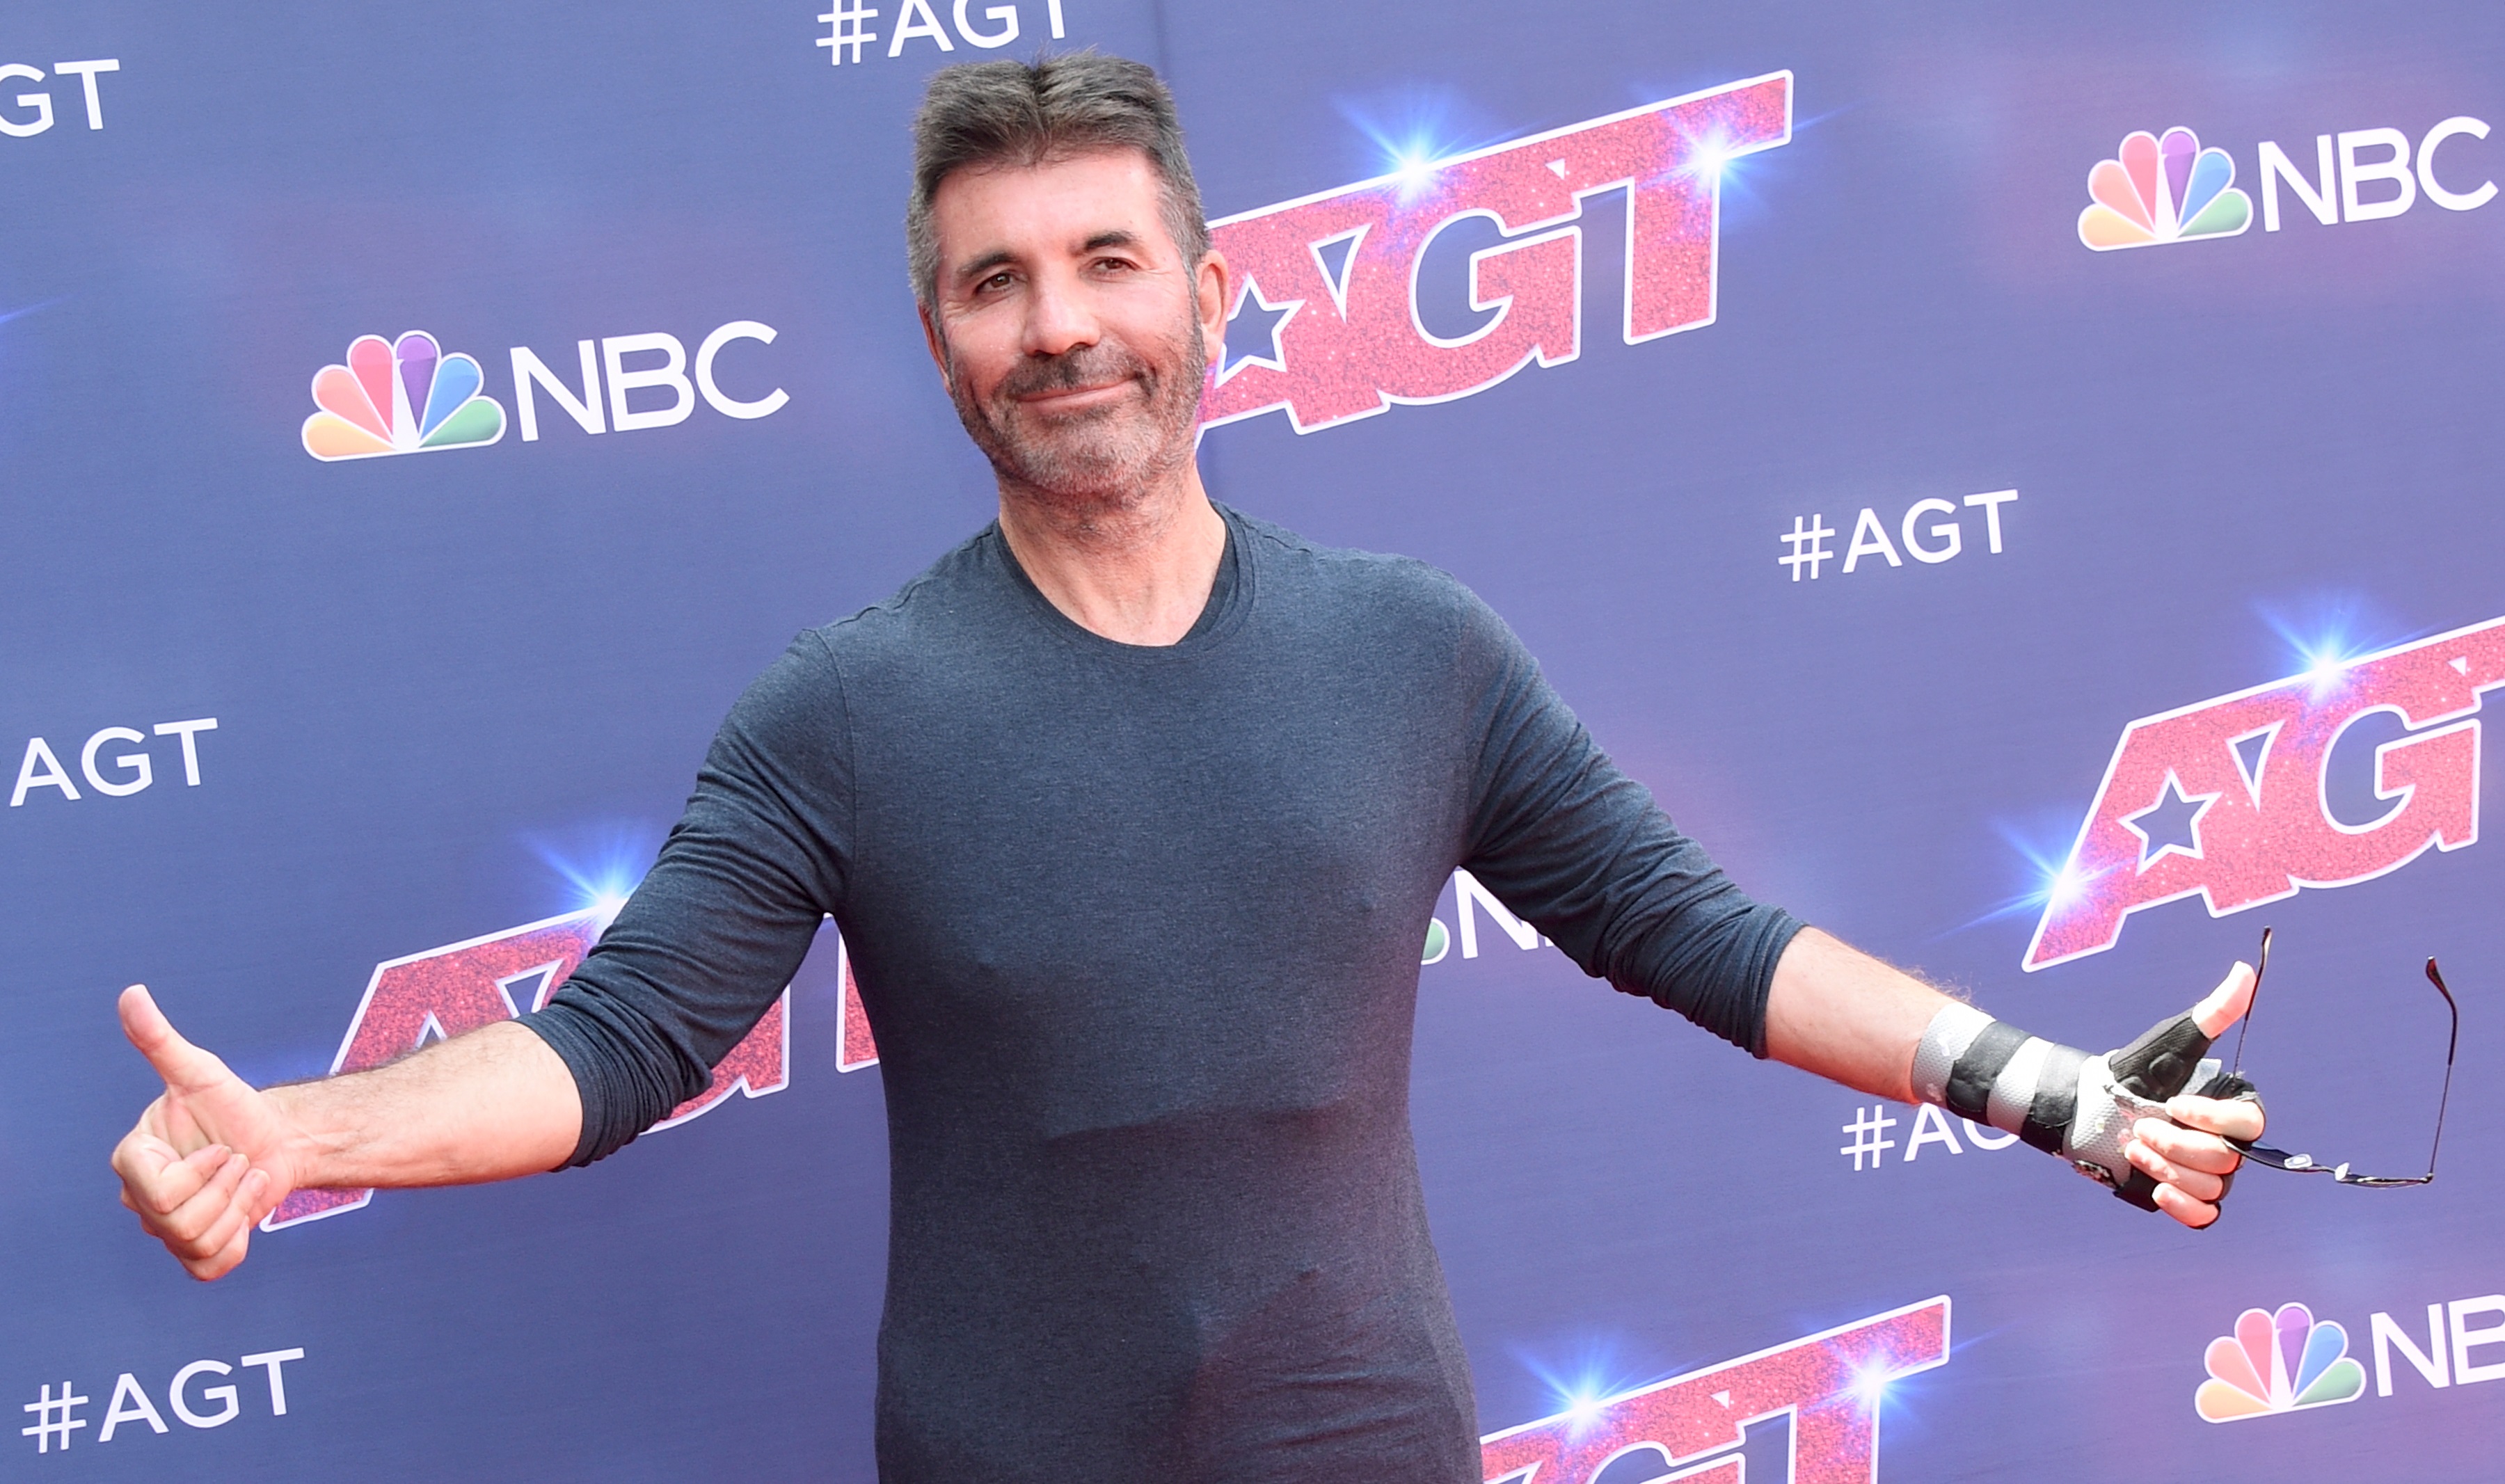 'America's Got Talent' judge Simon Cowell with his arms out posing for the season 17 kick-off